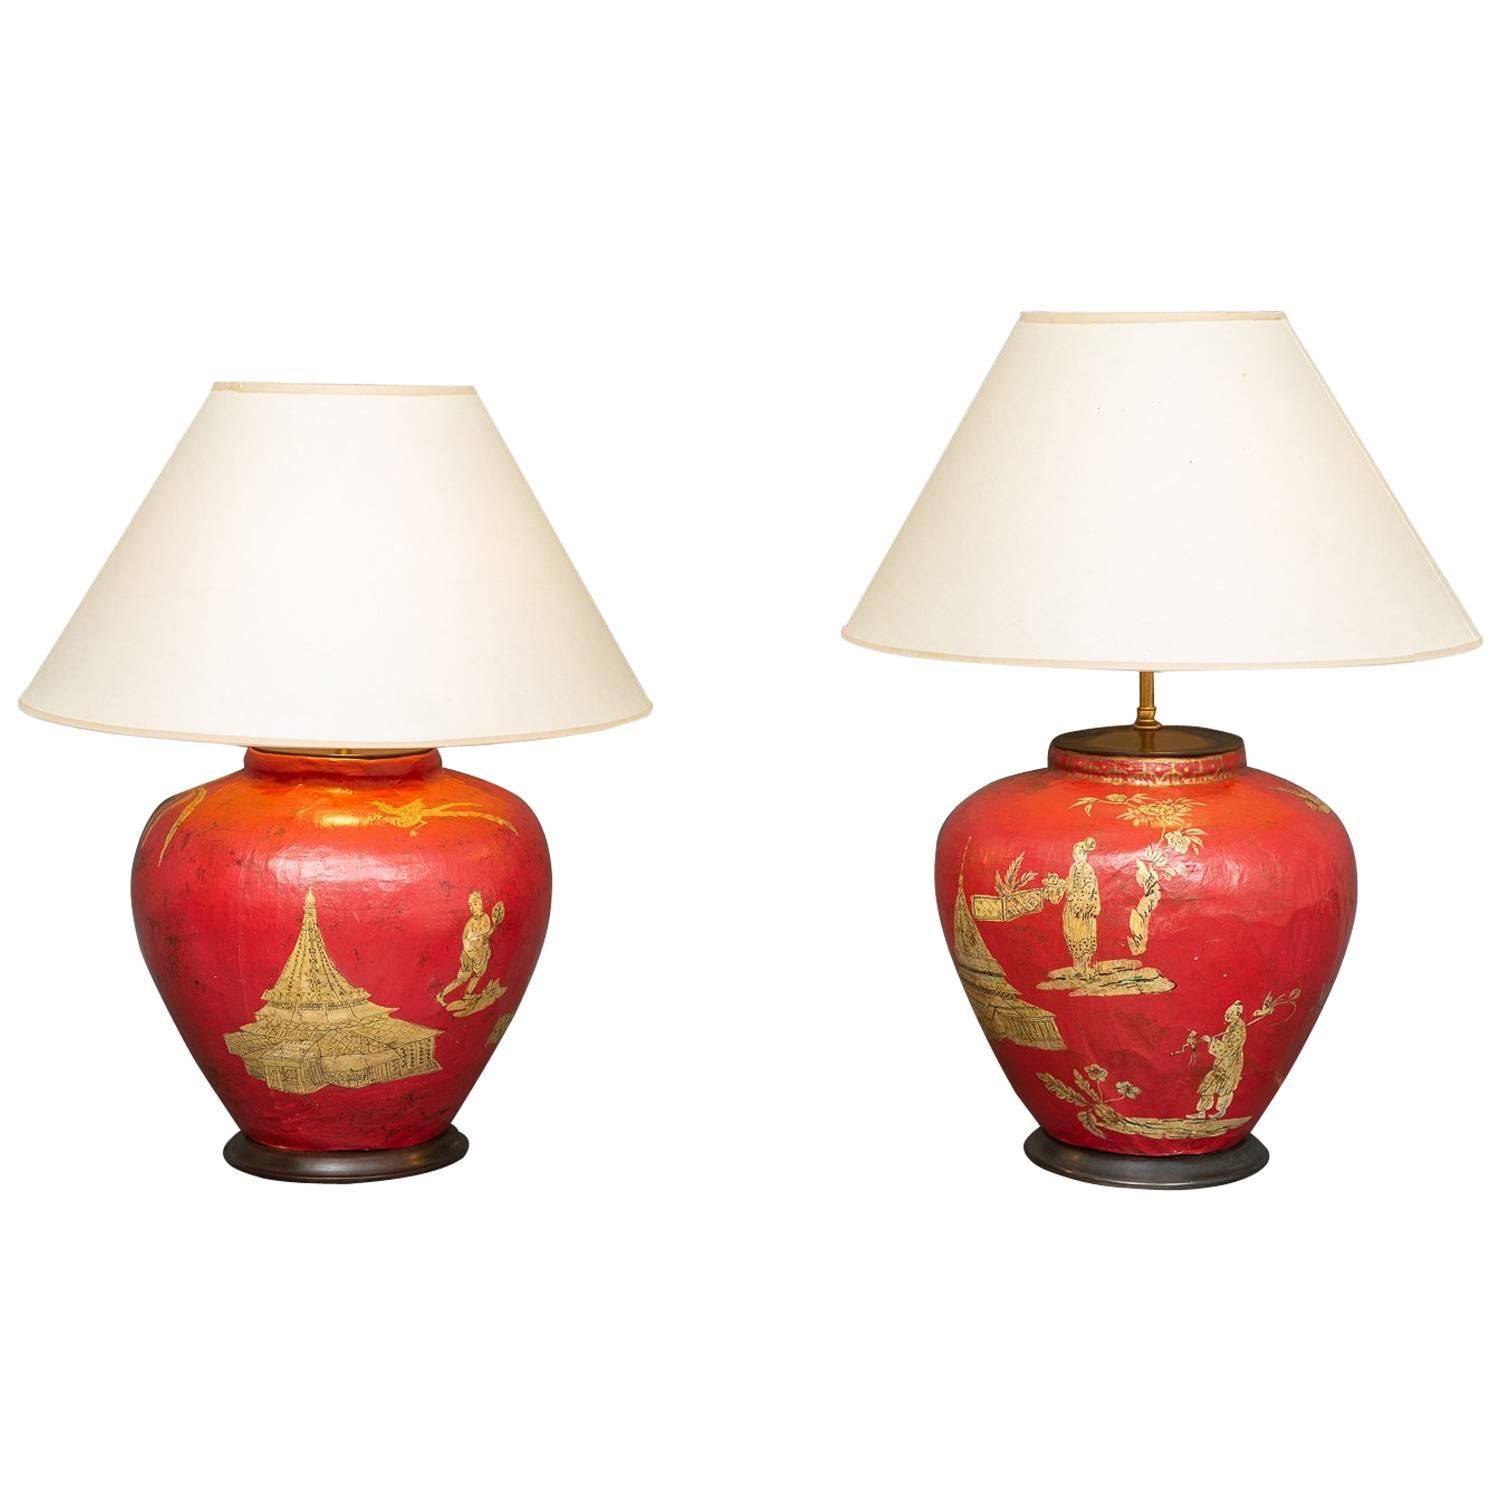 Pair of Handmade Parish Hadley Chinoiserie Decorated Lamps For Sale